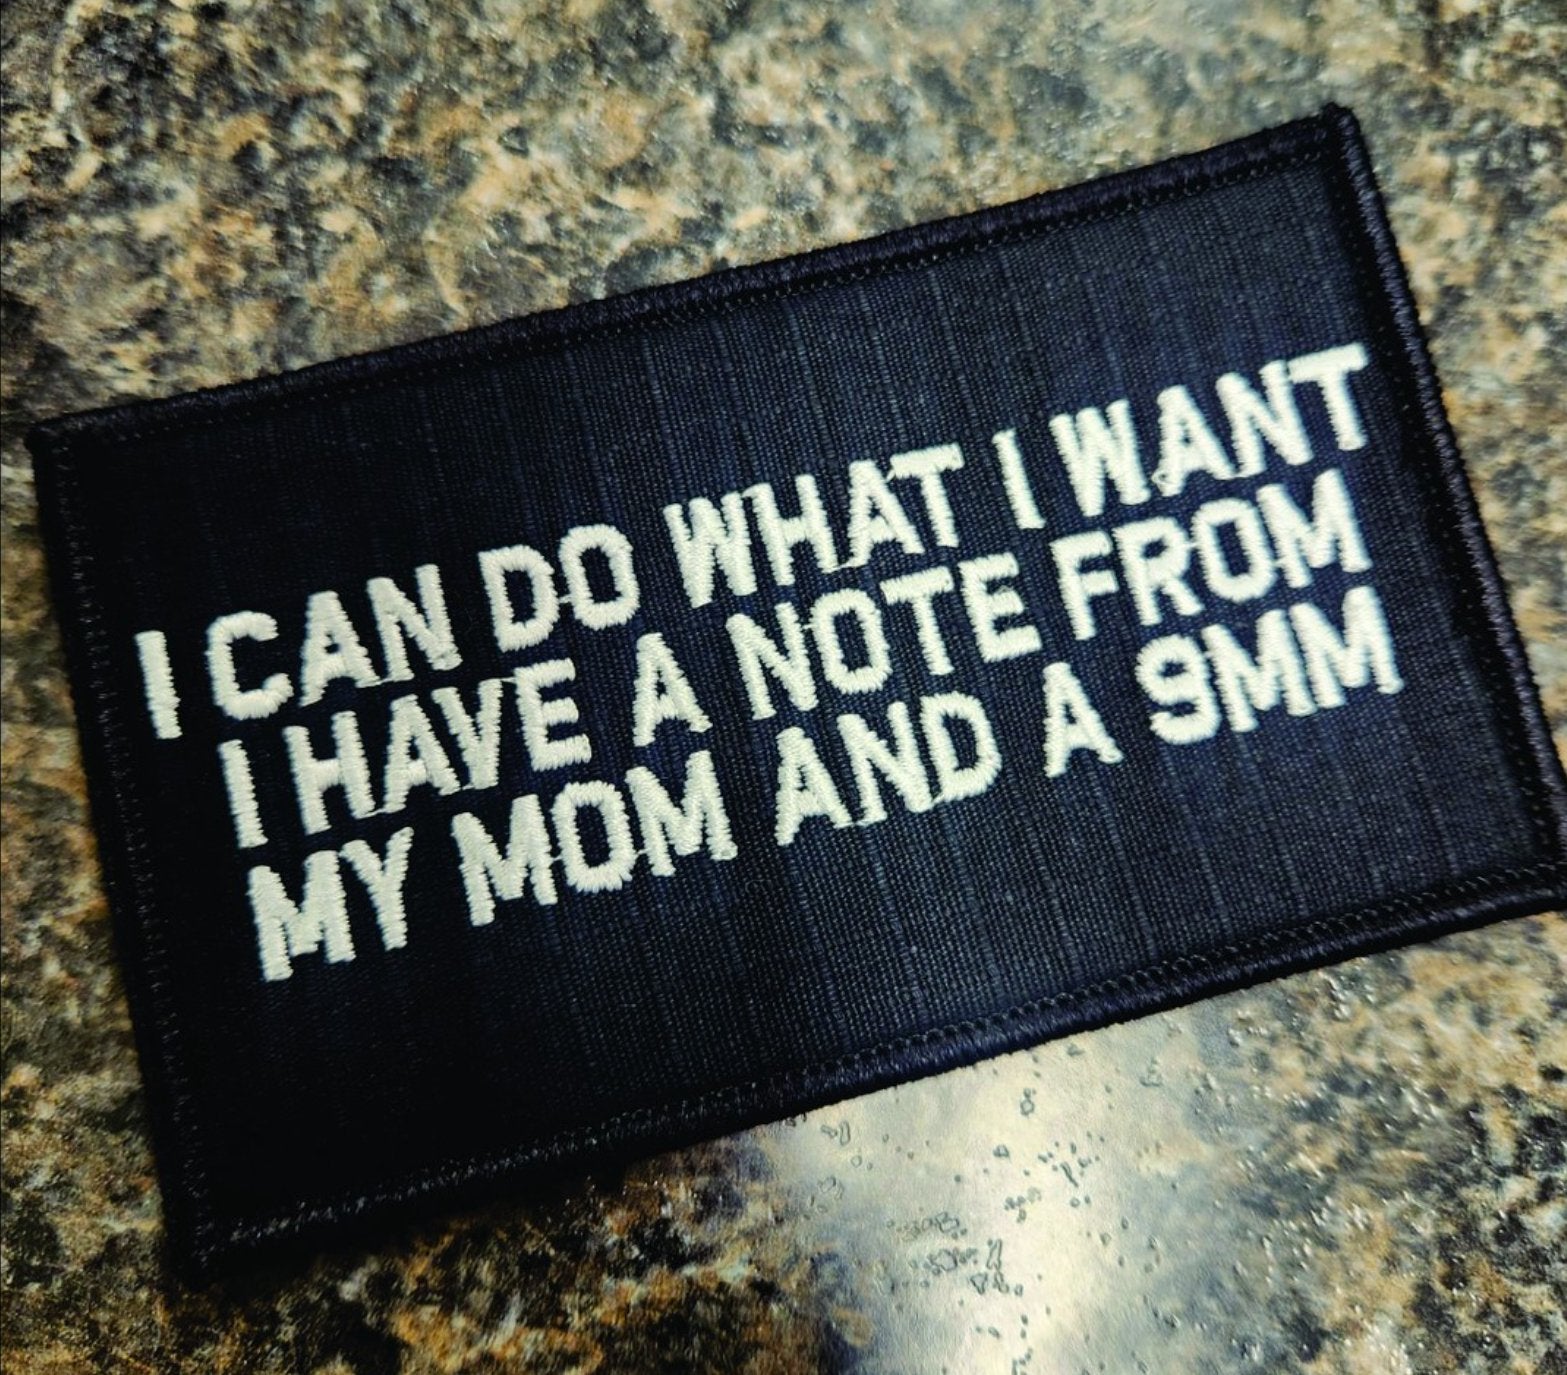 As Seen on Socials - I Can Do What I Want - I have a Note from my Mom and a 9mm - 2x4 Patch - Black w/White